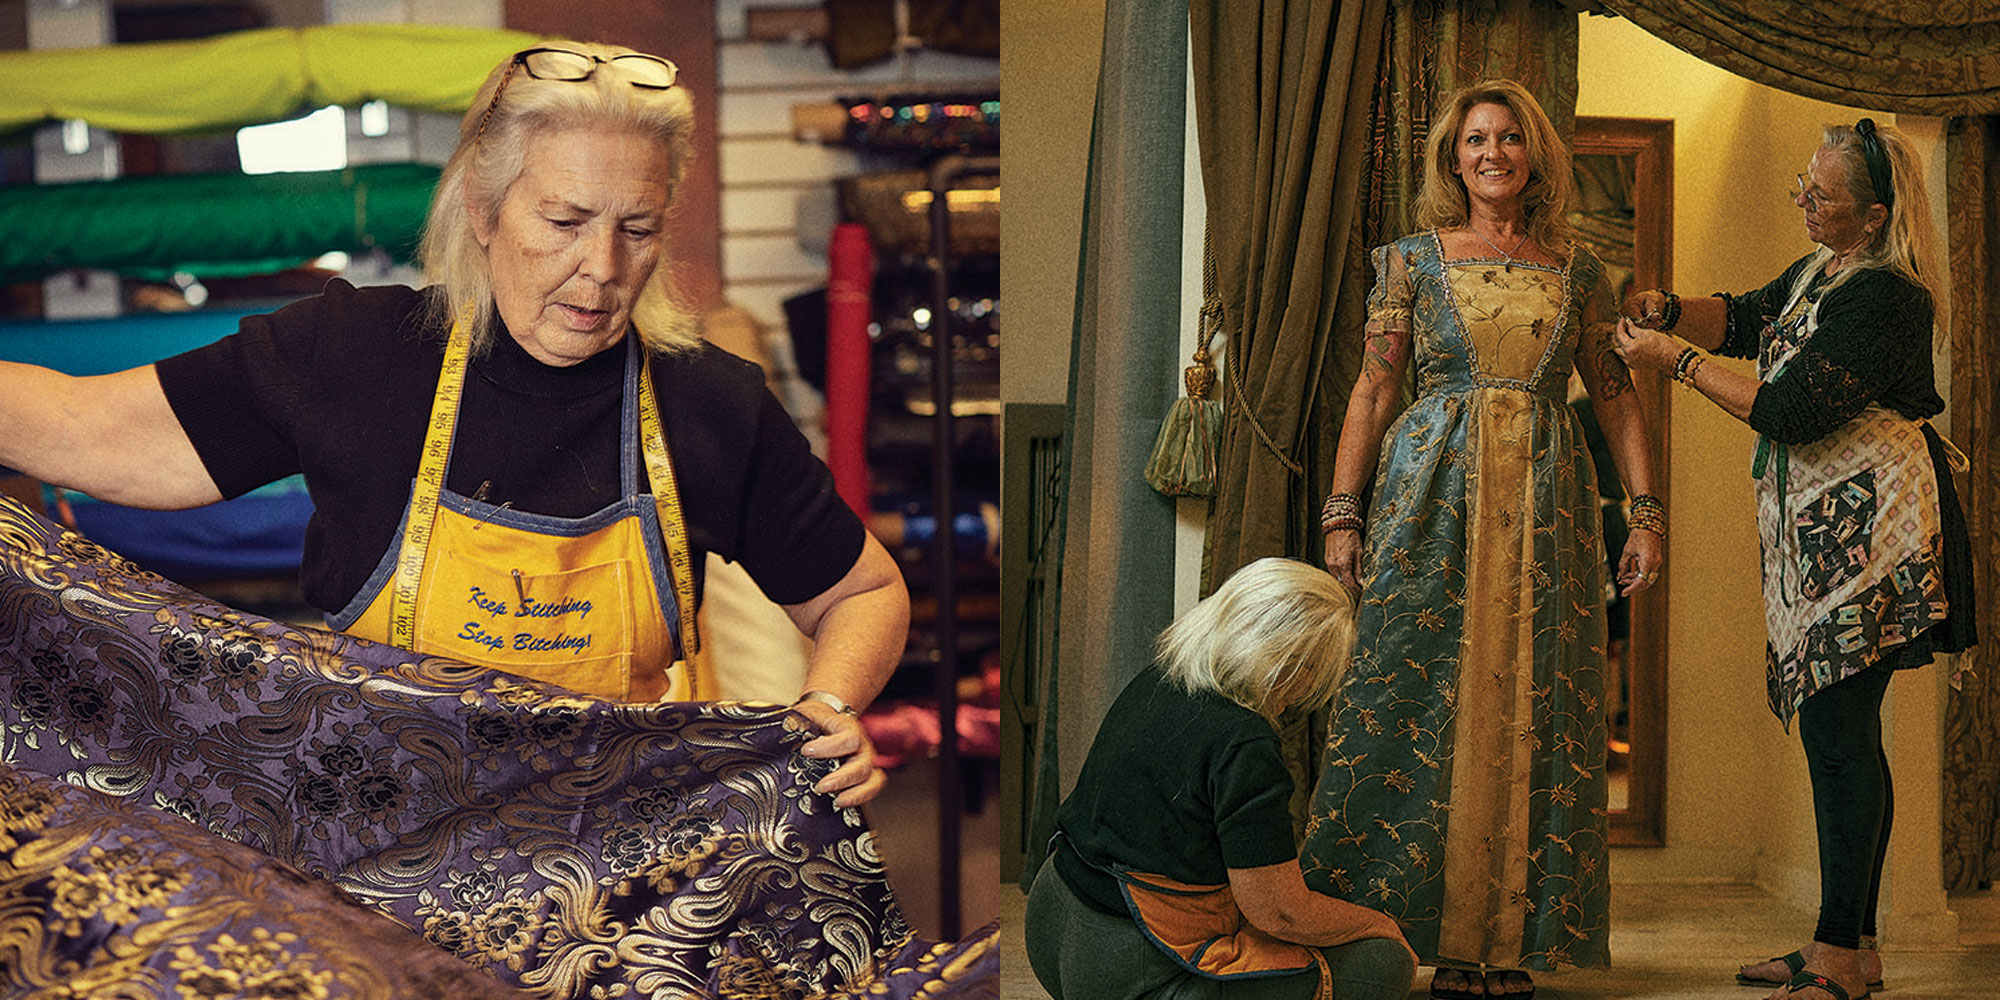 South Tampa Trading Co.'s custom handiwork creates one-of-a-kind, quality costumes. Seamstresses Rosemary Saunders (left) and Cindy “Anna Rosa” Dauck (right) work on outfits for Gasparilla.